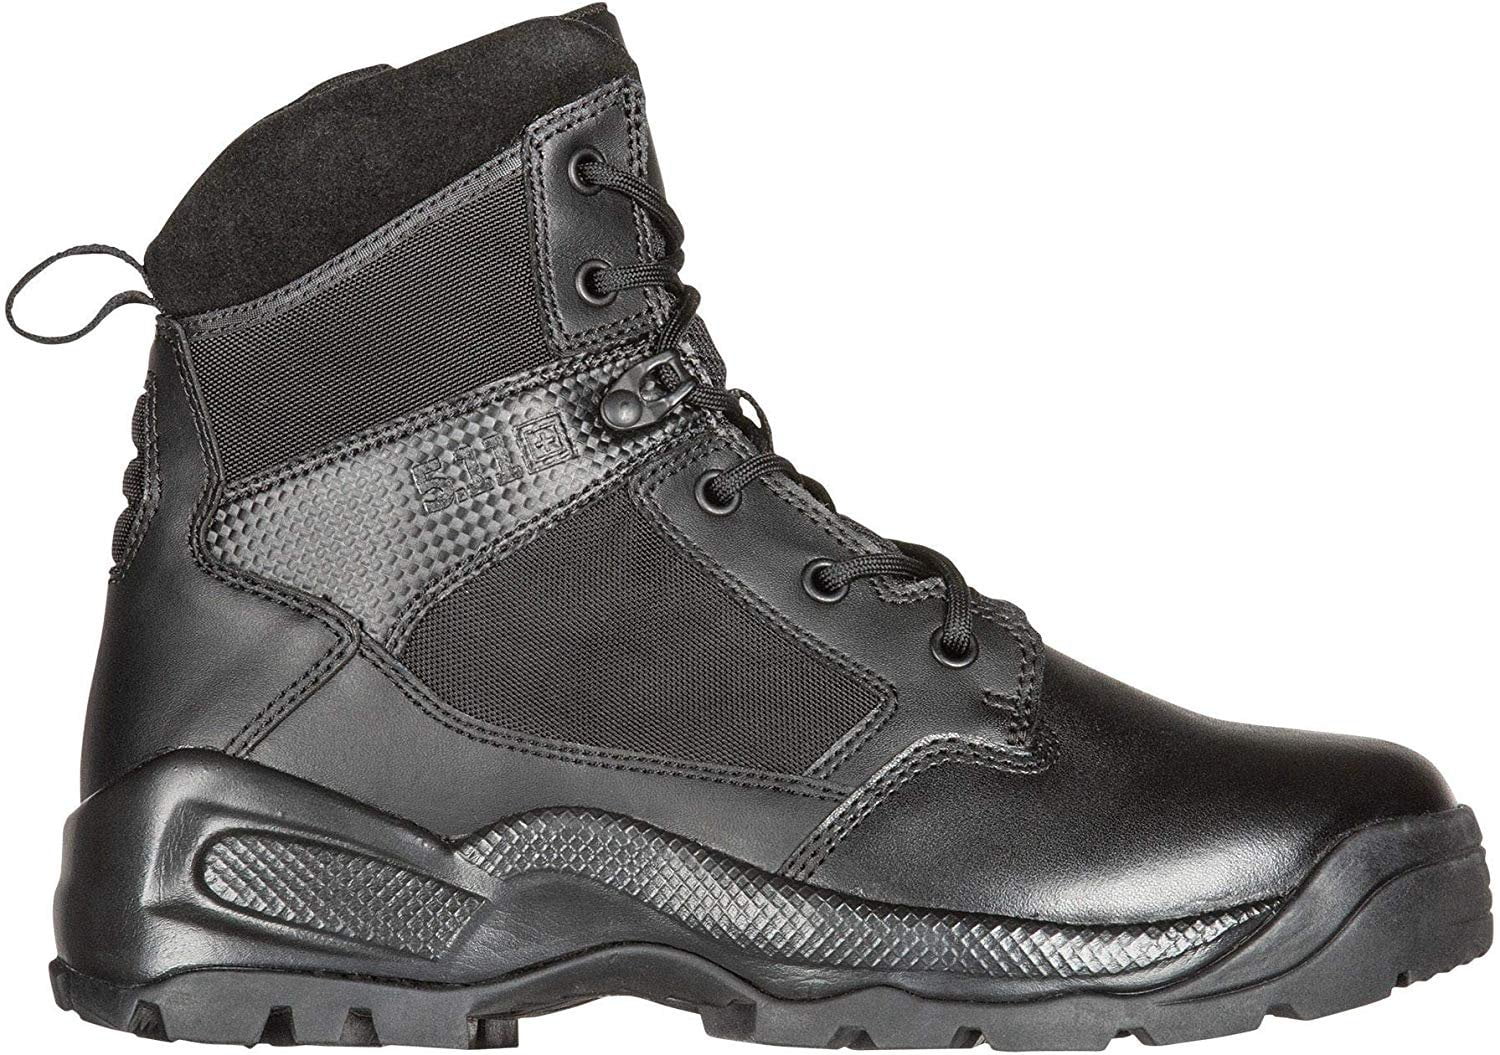 2.0 6" Side Zip Military Black Boot 5.11 Tactical Men's A.T.A.C Style 12394 